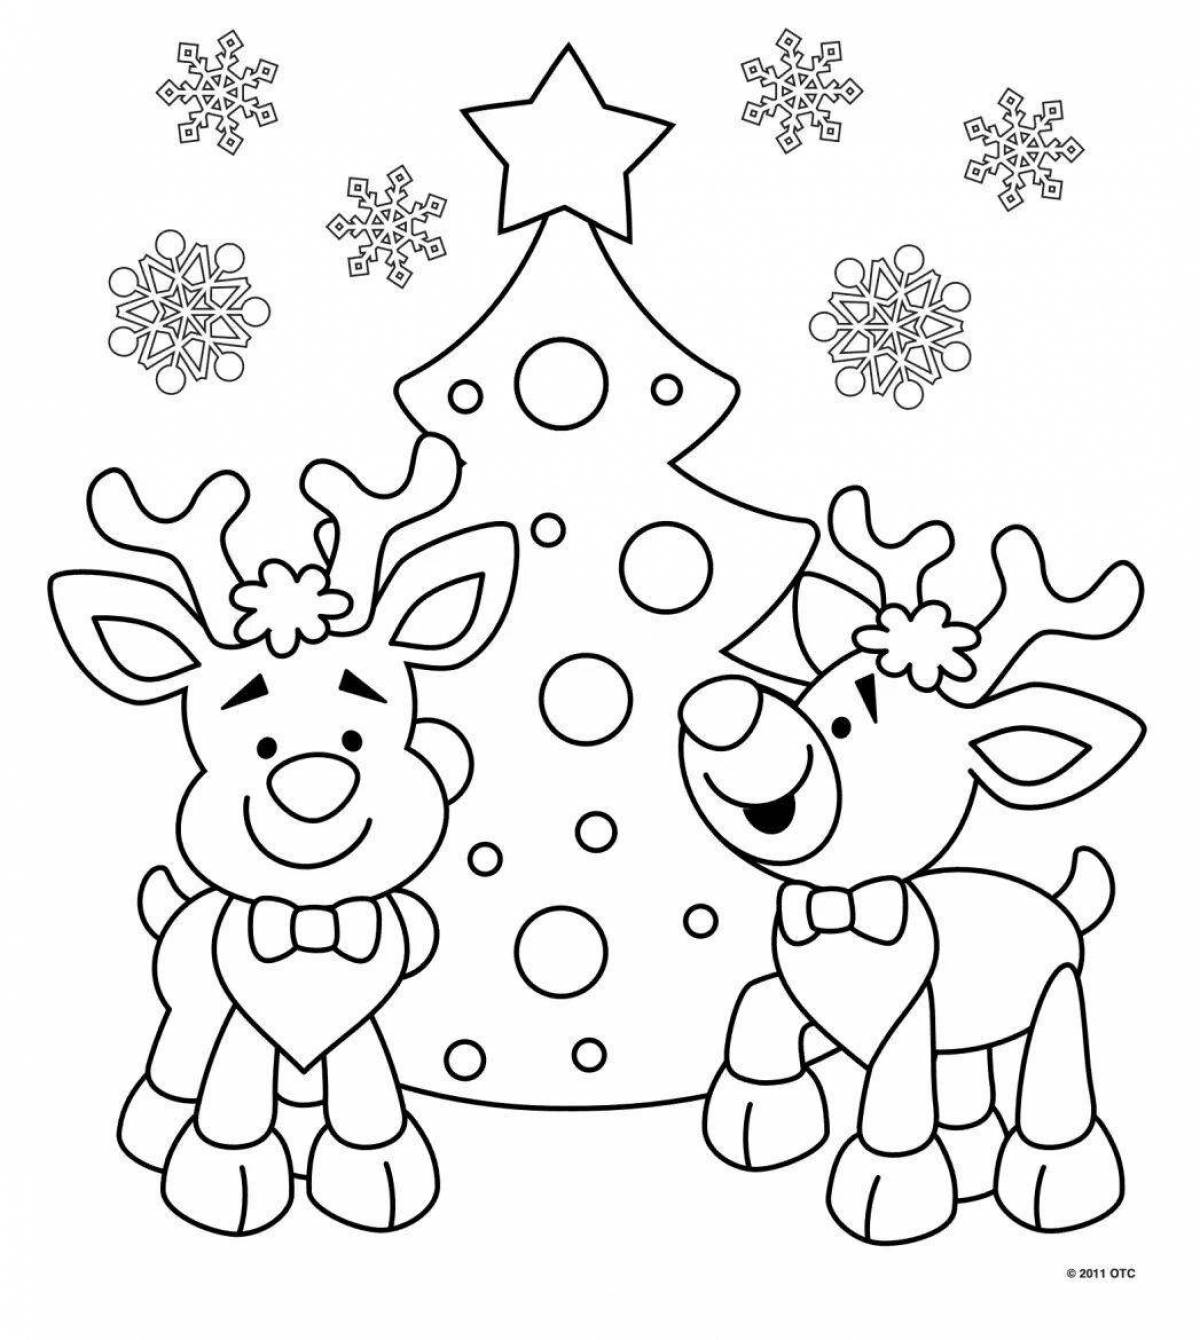 Merry Christmas coloring pages